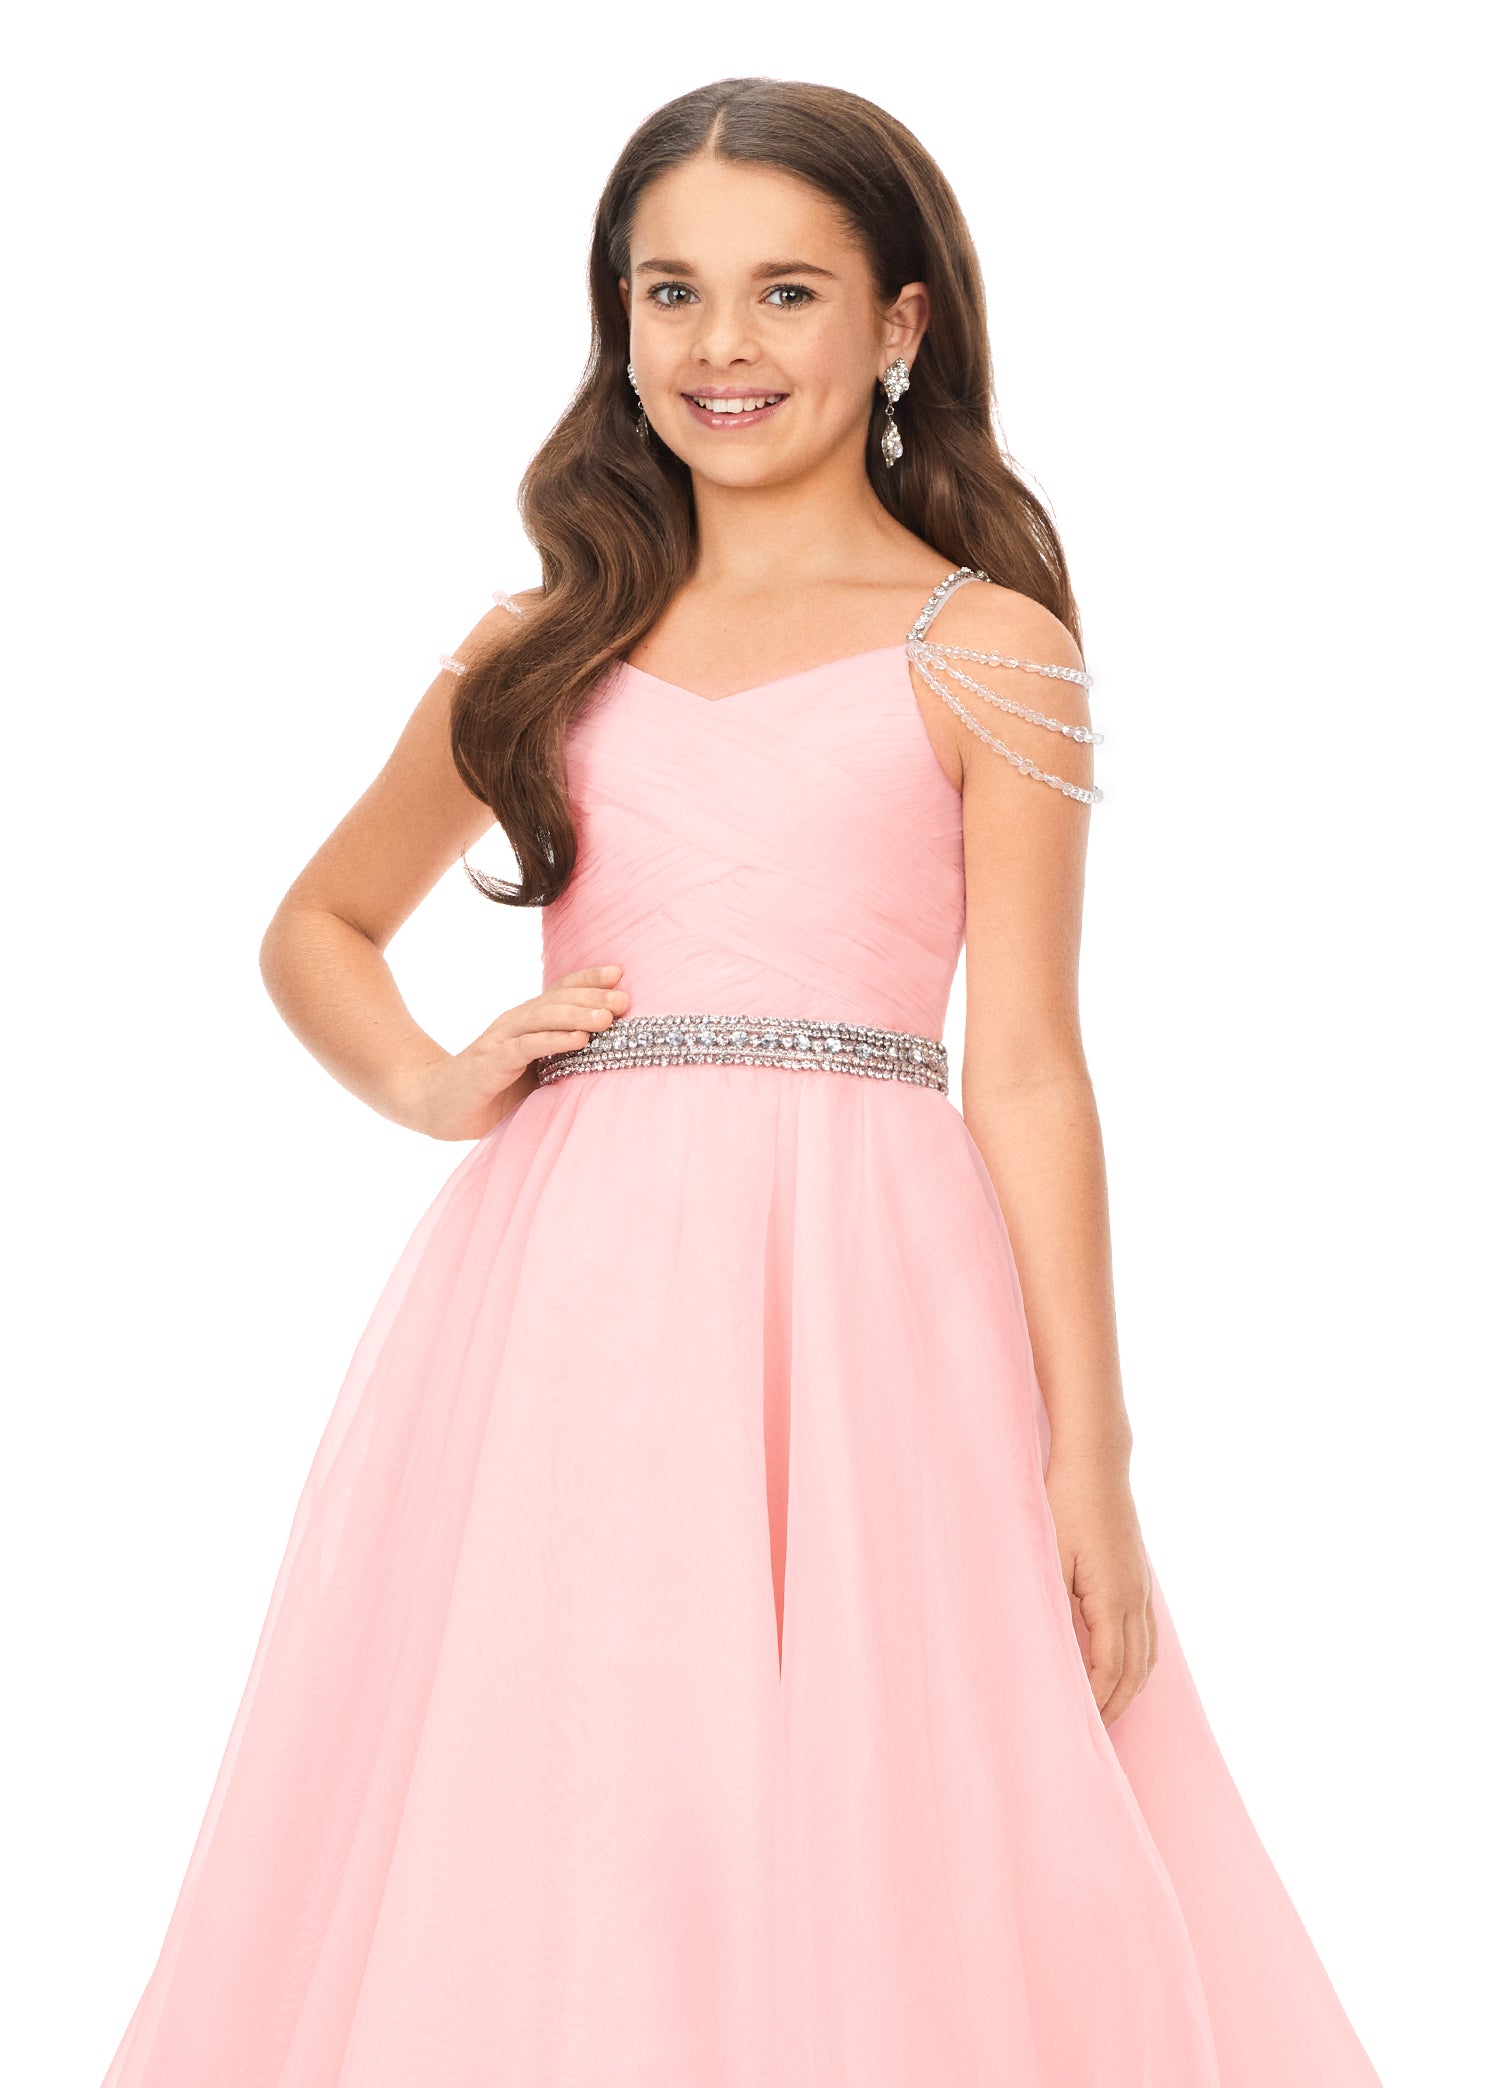 Ashley Lauren Kids 8170 Girls Organza Pageant Dress Ball Gown with Beaded Details ice-pink